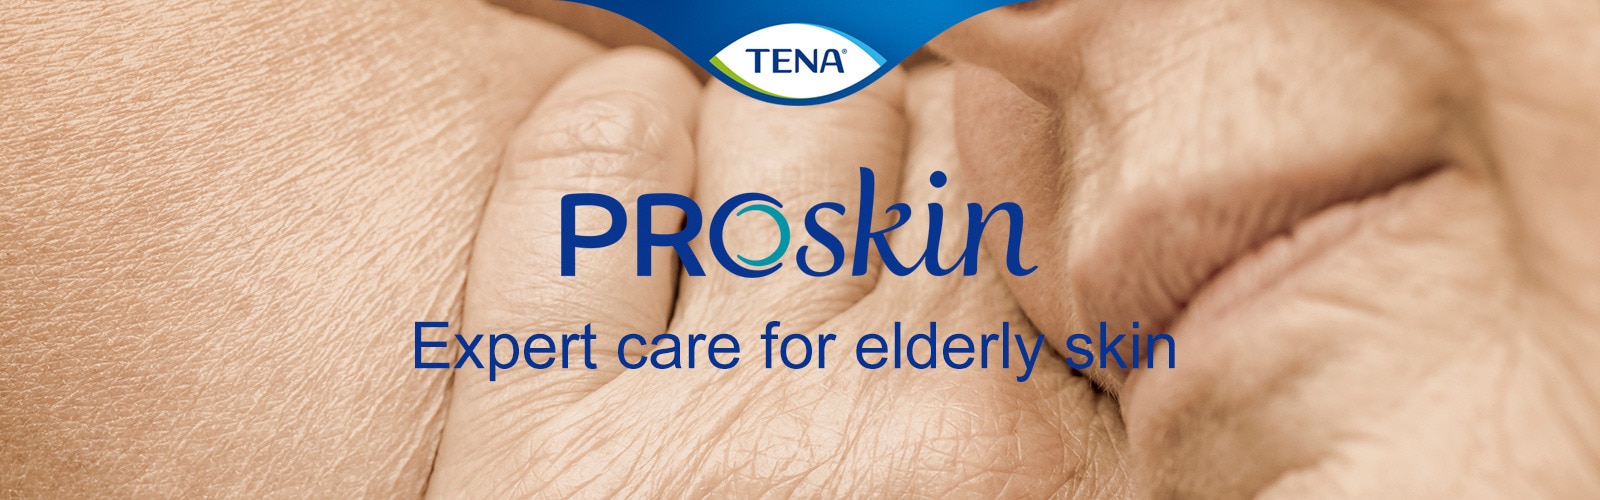 TENA ProSkin Brings Incontinence Care and Skin Health Together